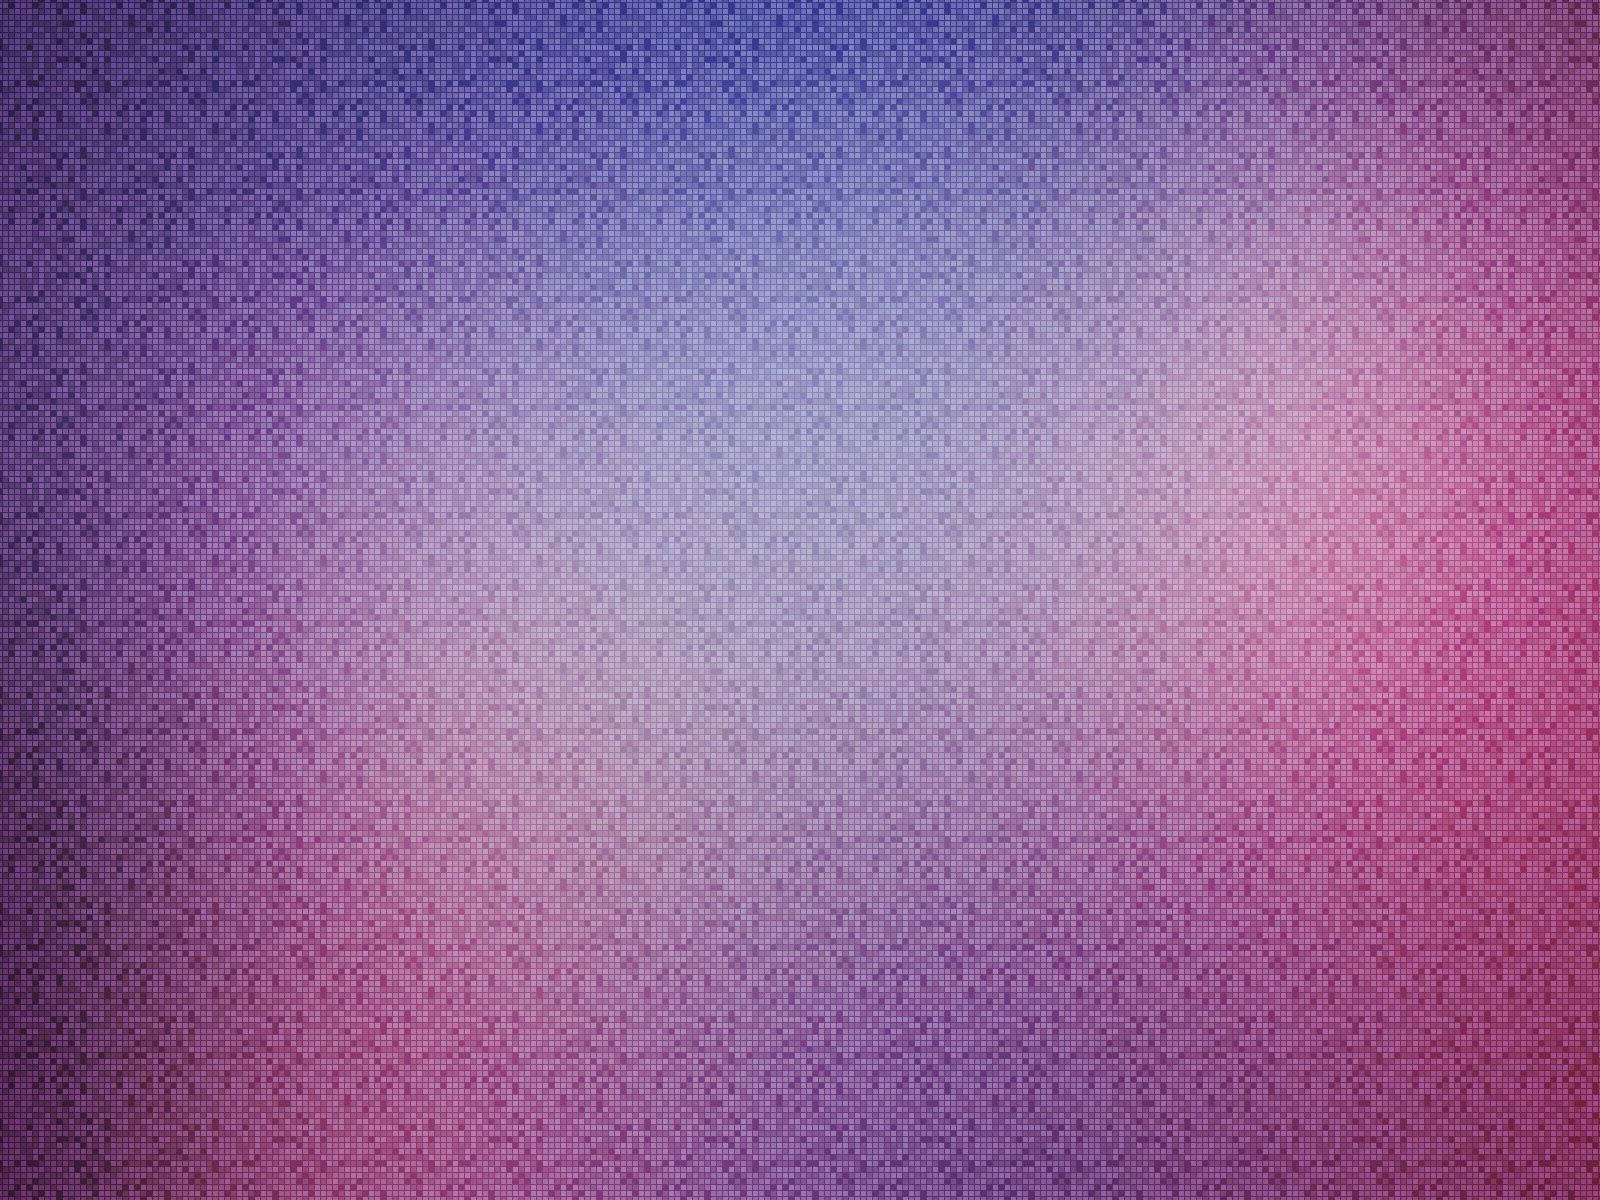 Pixel 1600X1200 Wallpaper and Background Image